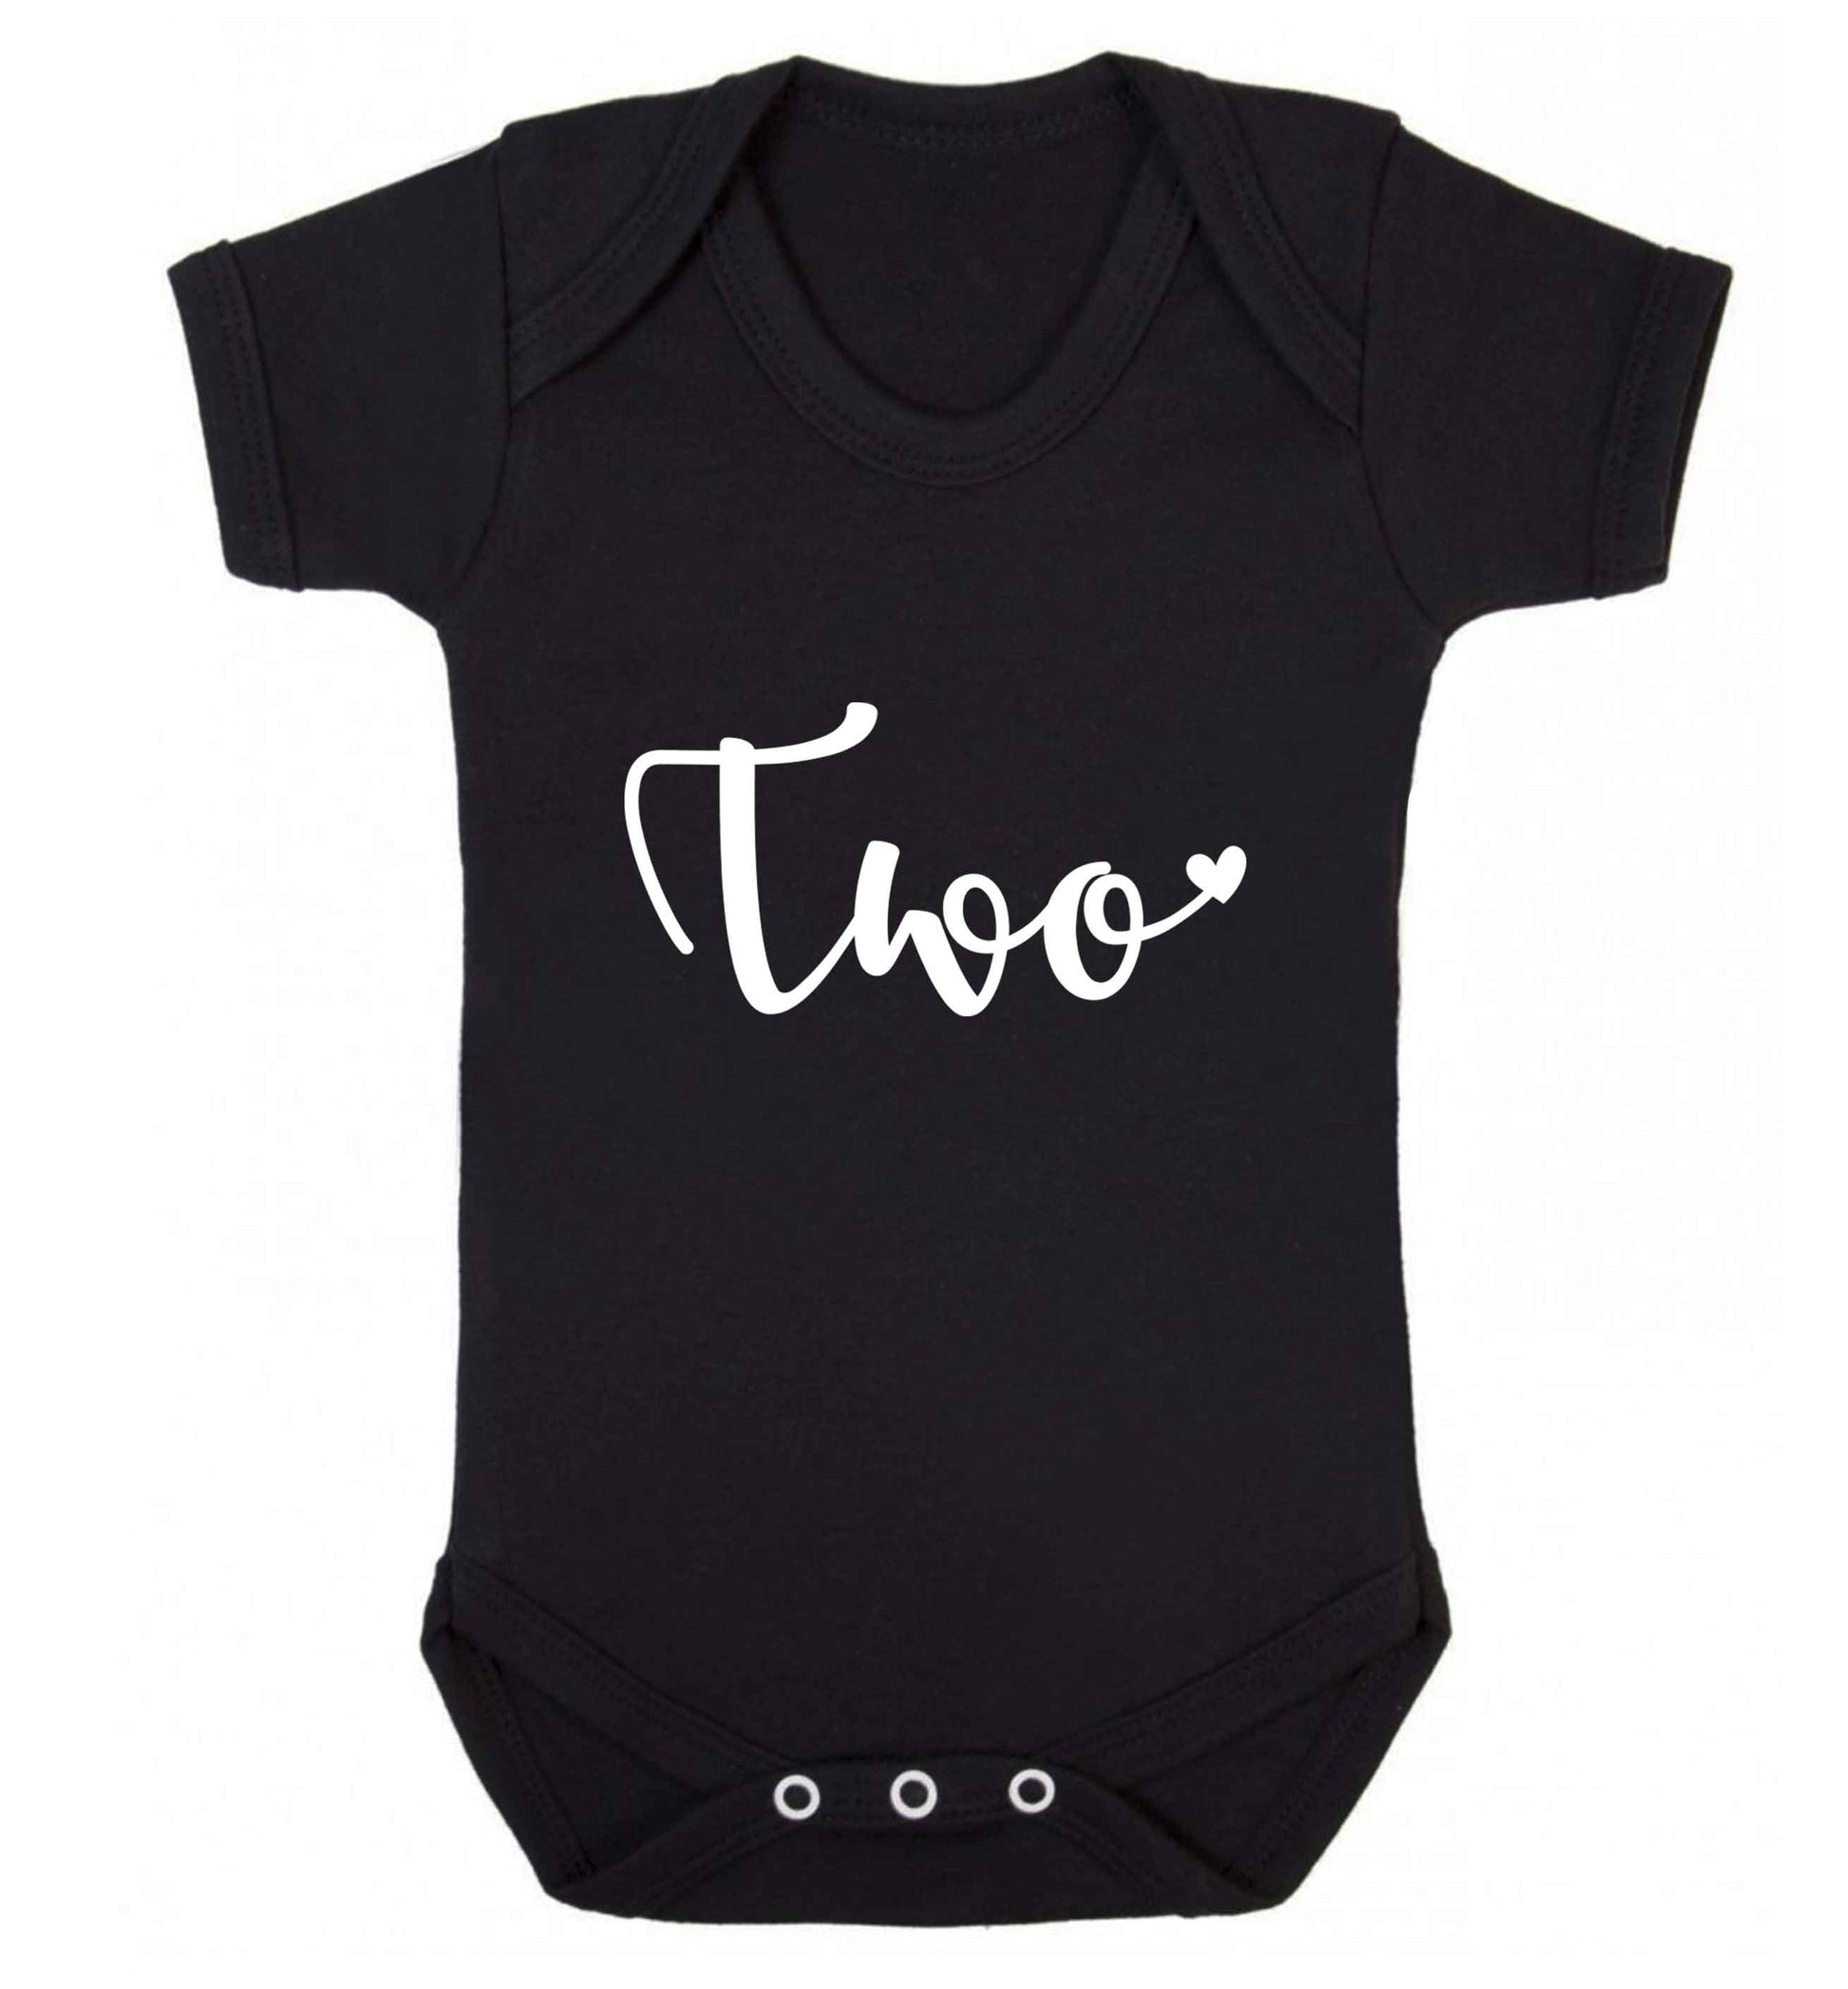 Two and Heart baby vest black 18-24 months